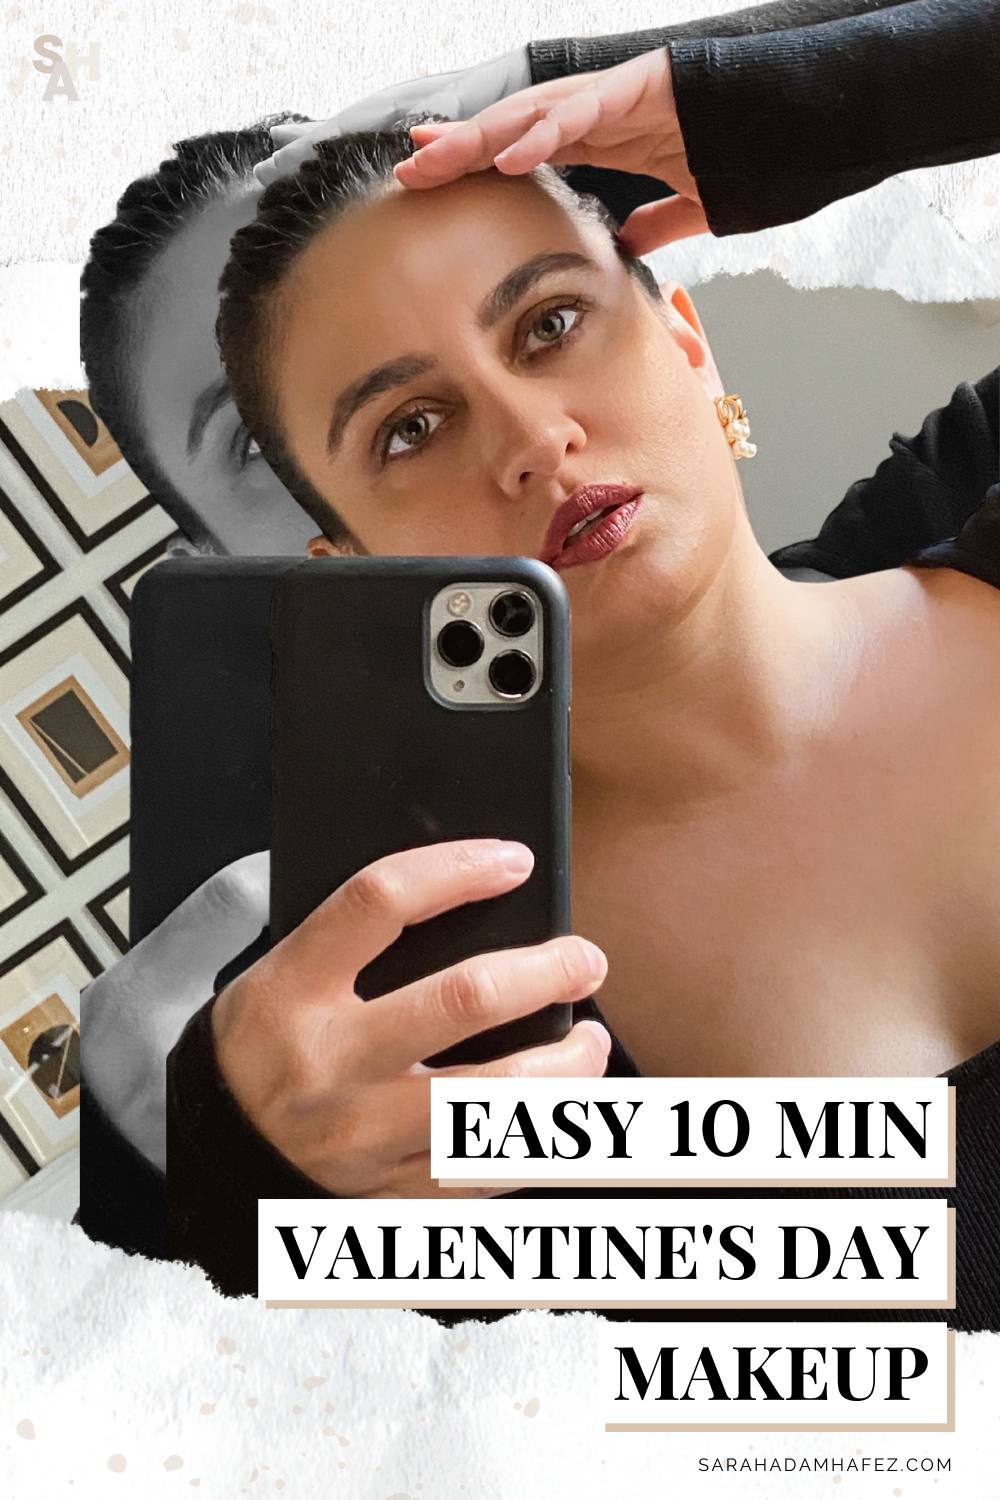 valentines day, valentines day makeup, valentines day makeup easy